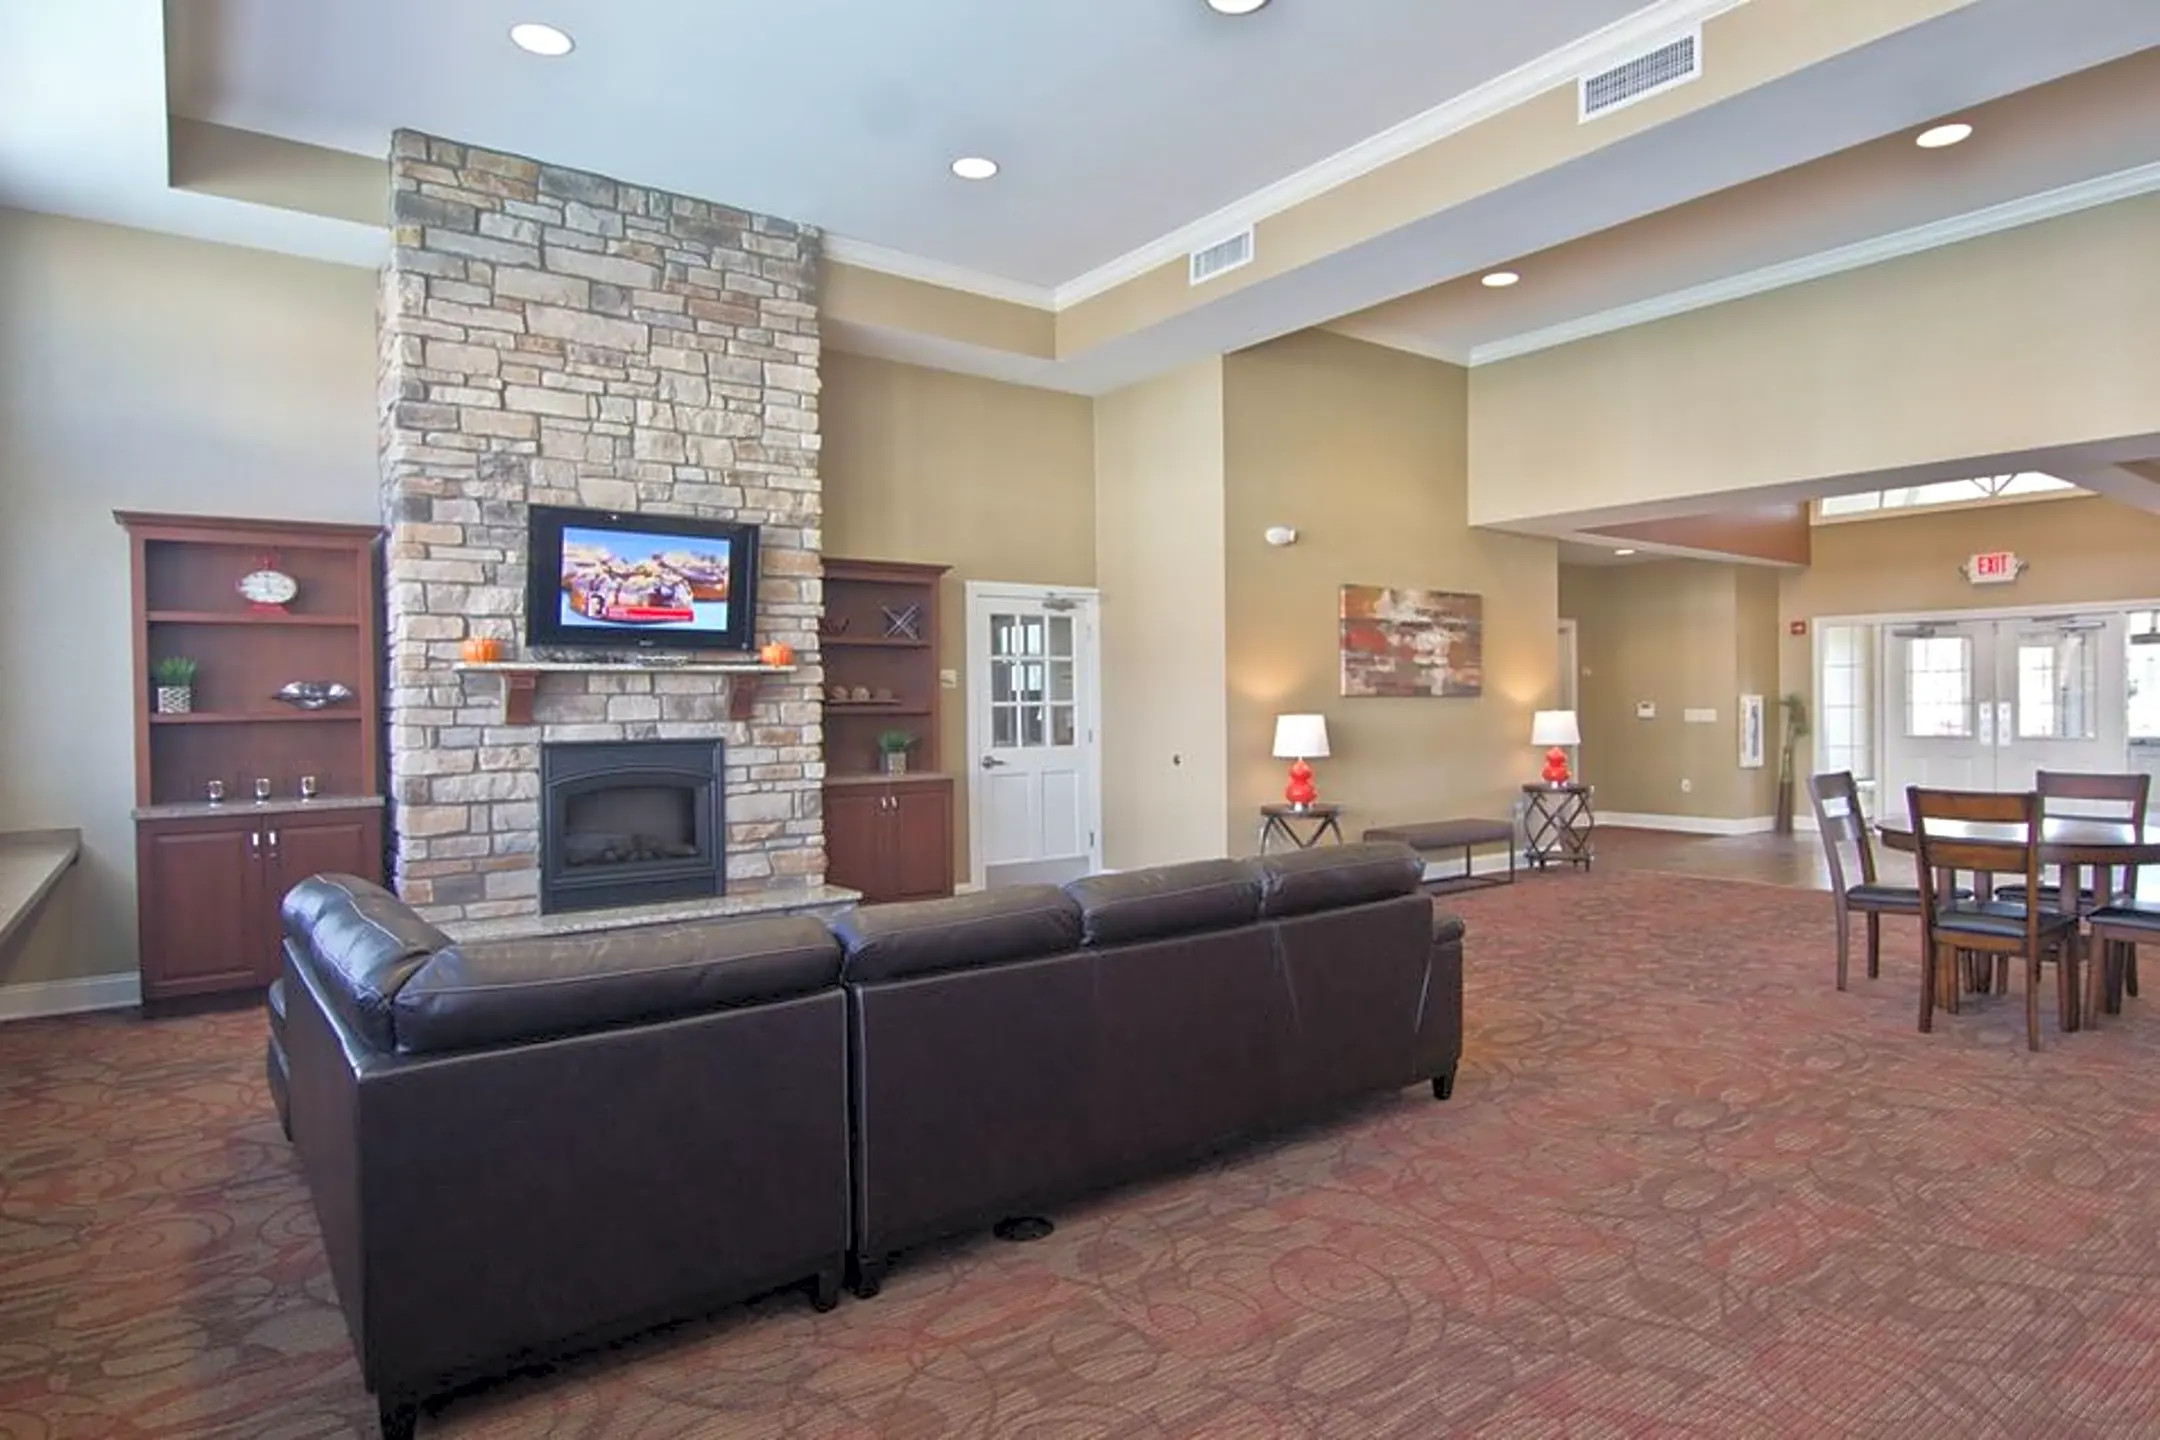 Clubhouse - The Residences at Carronade - Perrysburg, OH